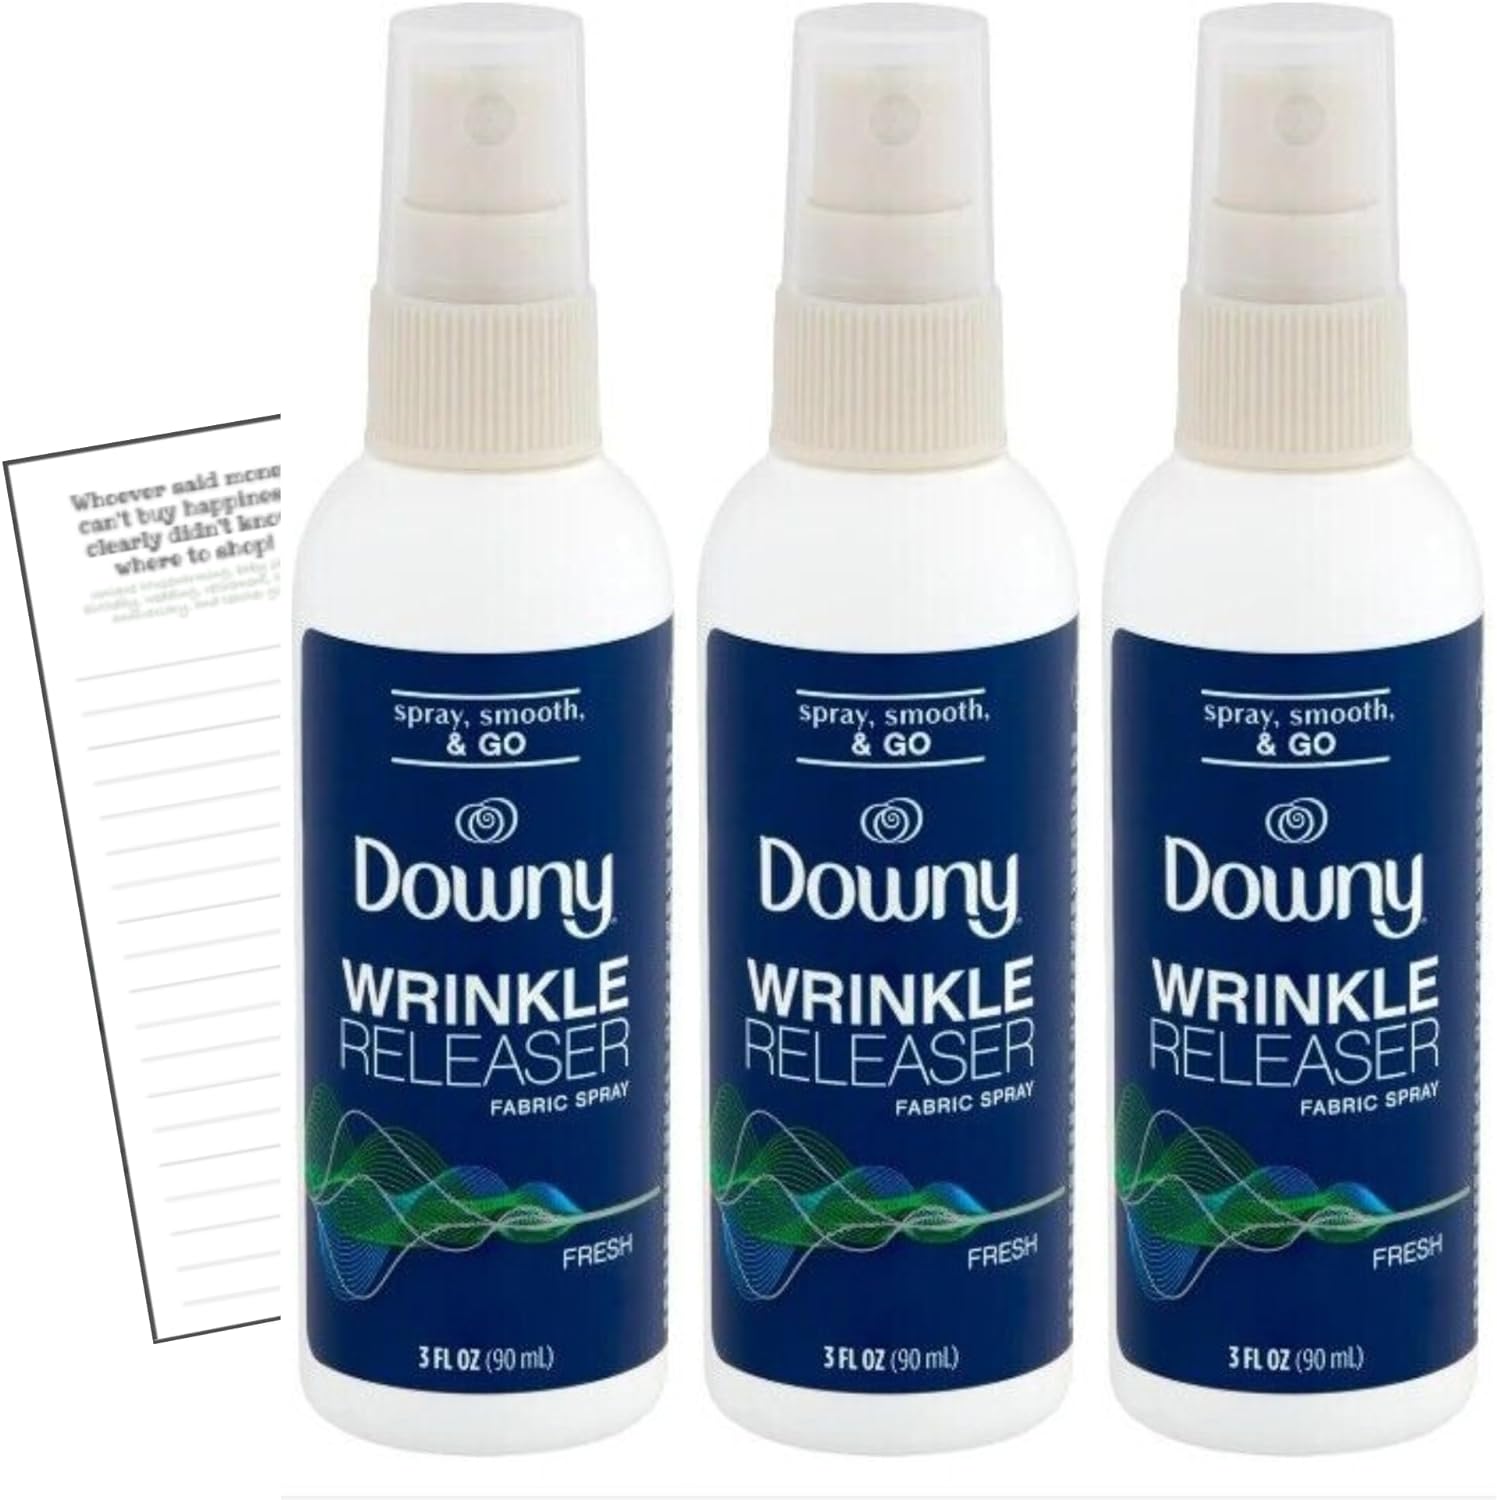 Bundle of Downy Wrinkle Releaser, 3oz Travel Size, Light Fresh Scent (3 Pack-Packaging May Vary) by Downy with Convenient Magnetic Shopping List by Harper & Ivy Designs : Health & Household